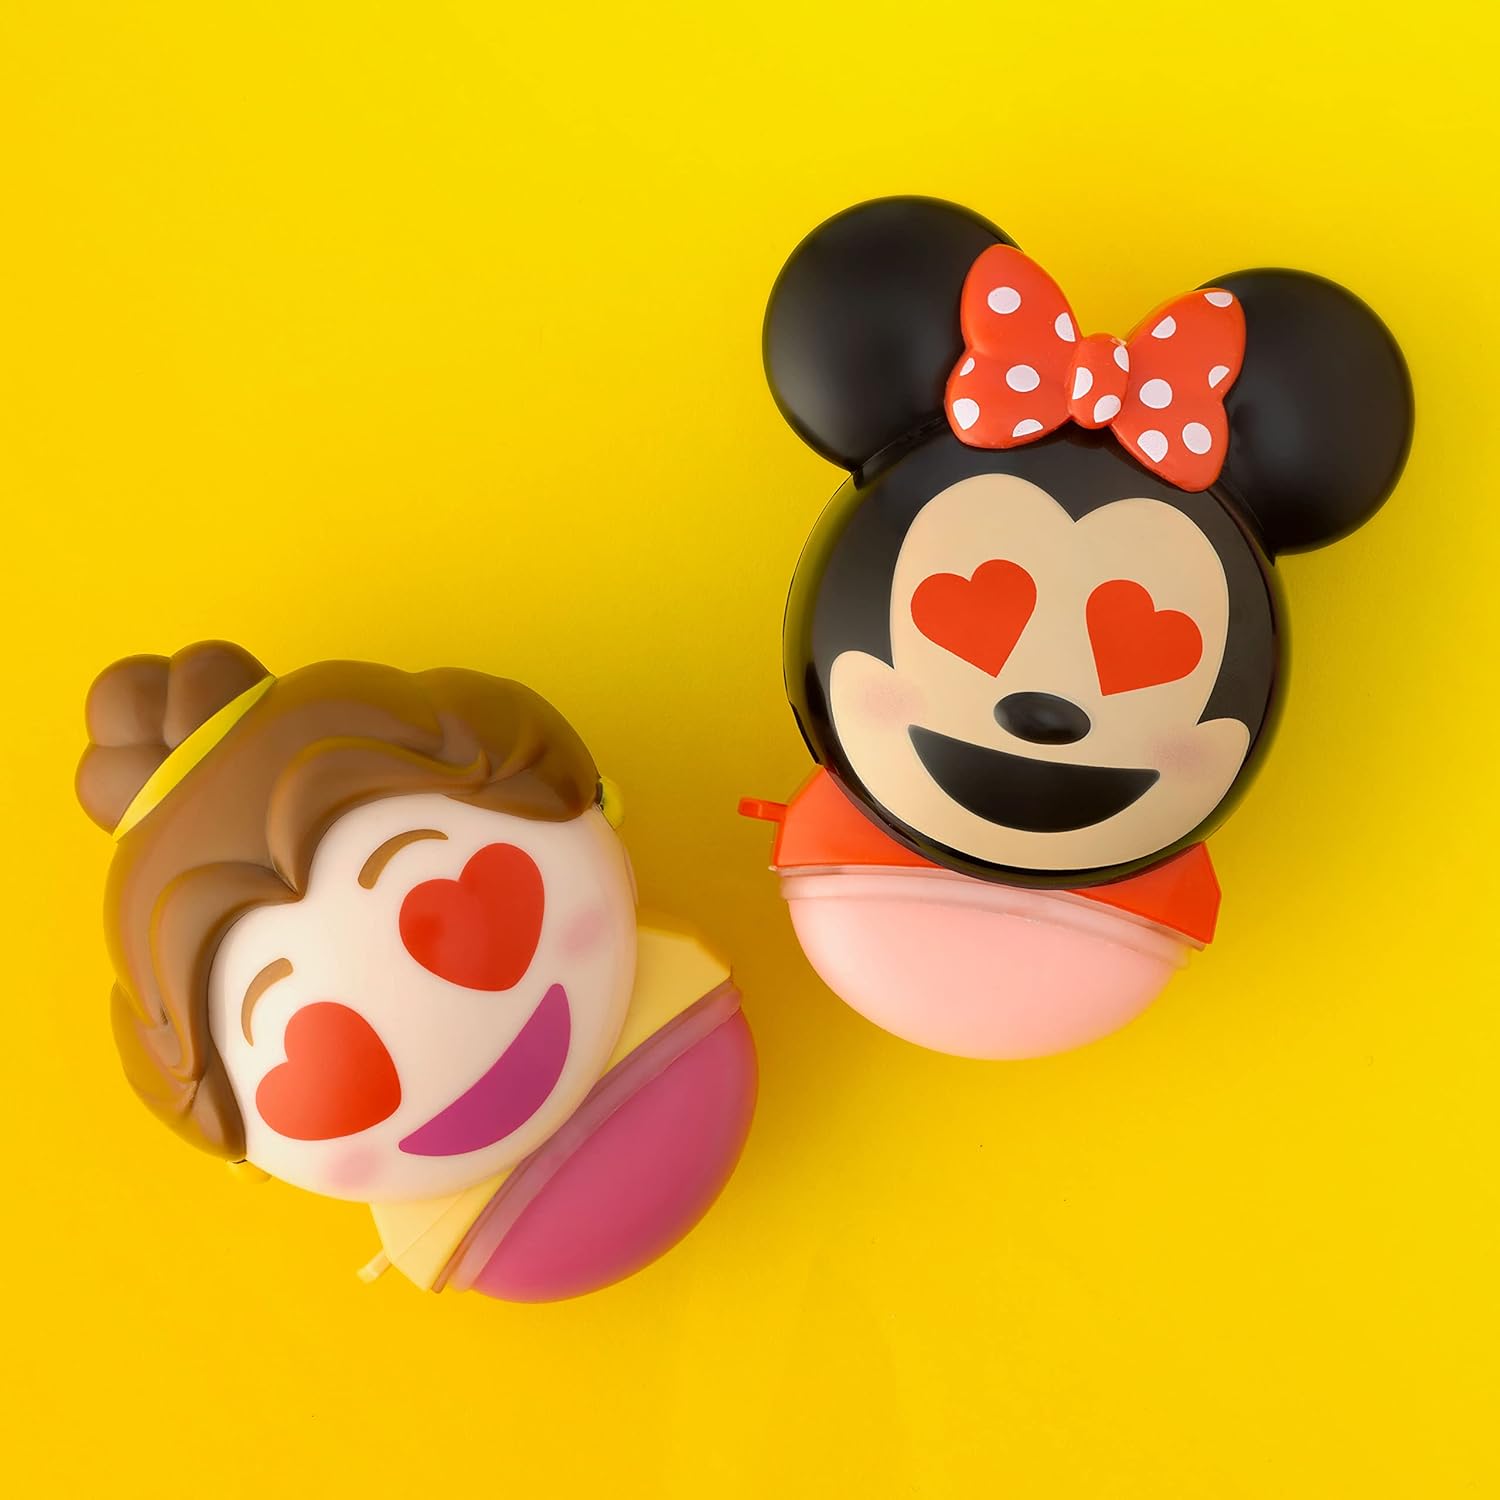 Lip Smacker Disney Minnie Mouse and Beauty And The Beast Belle Emoji Lip Balm Duo, Flavored Strawberry Lemonade, Bow-nade, 2 Pack : Beauty & Personal Care